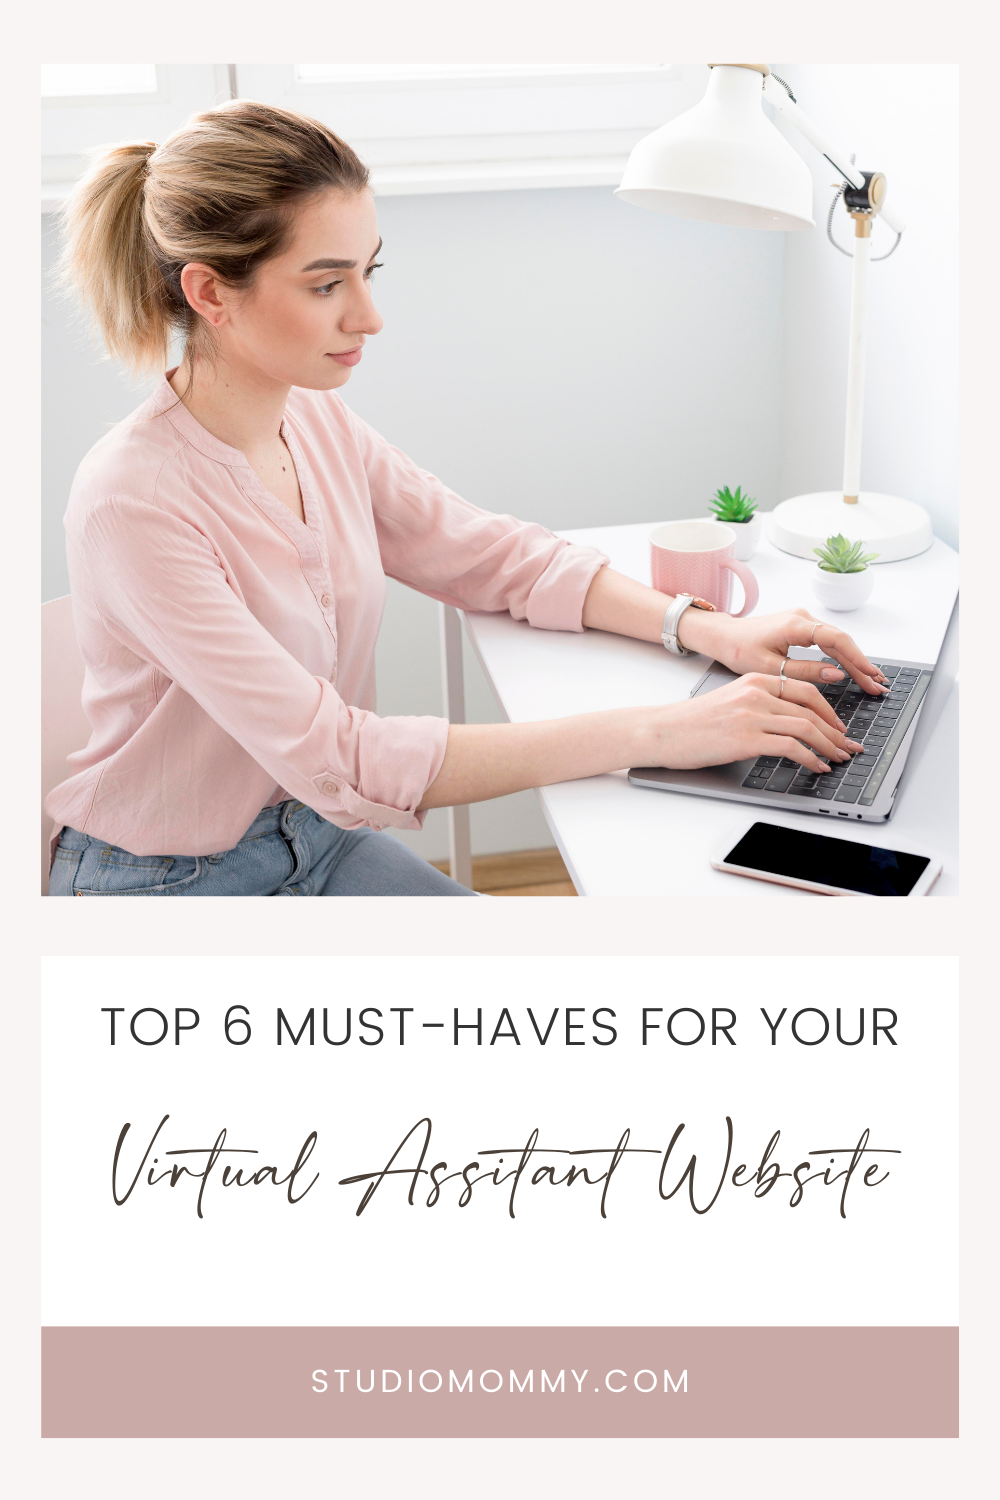 f you plan to become a Virtual Assistant (VA), one of the most critical ways to build a successful virtual assistant business, from day one,  is to have a website.  Having a website shows potential clients that you are a legitimate business.  It’s a great way to earn trust from a potential client.